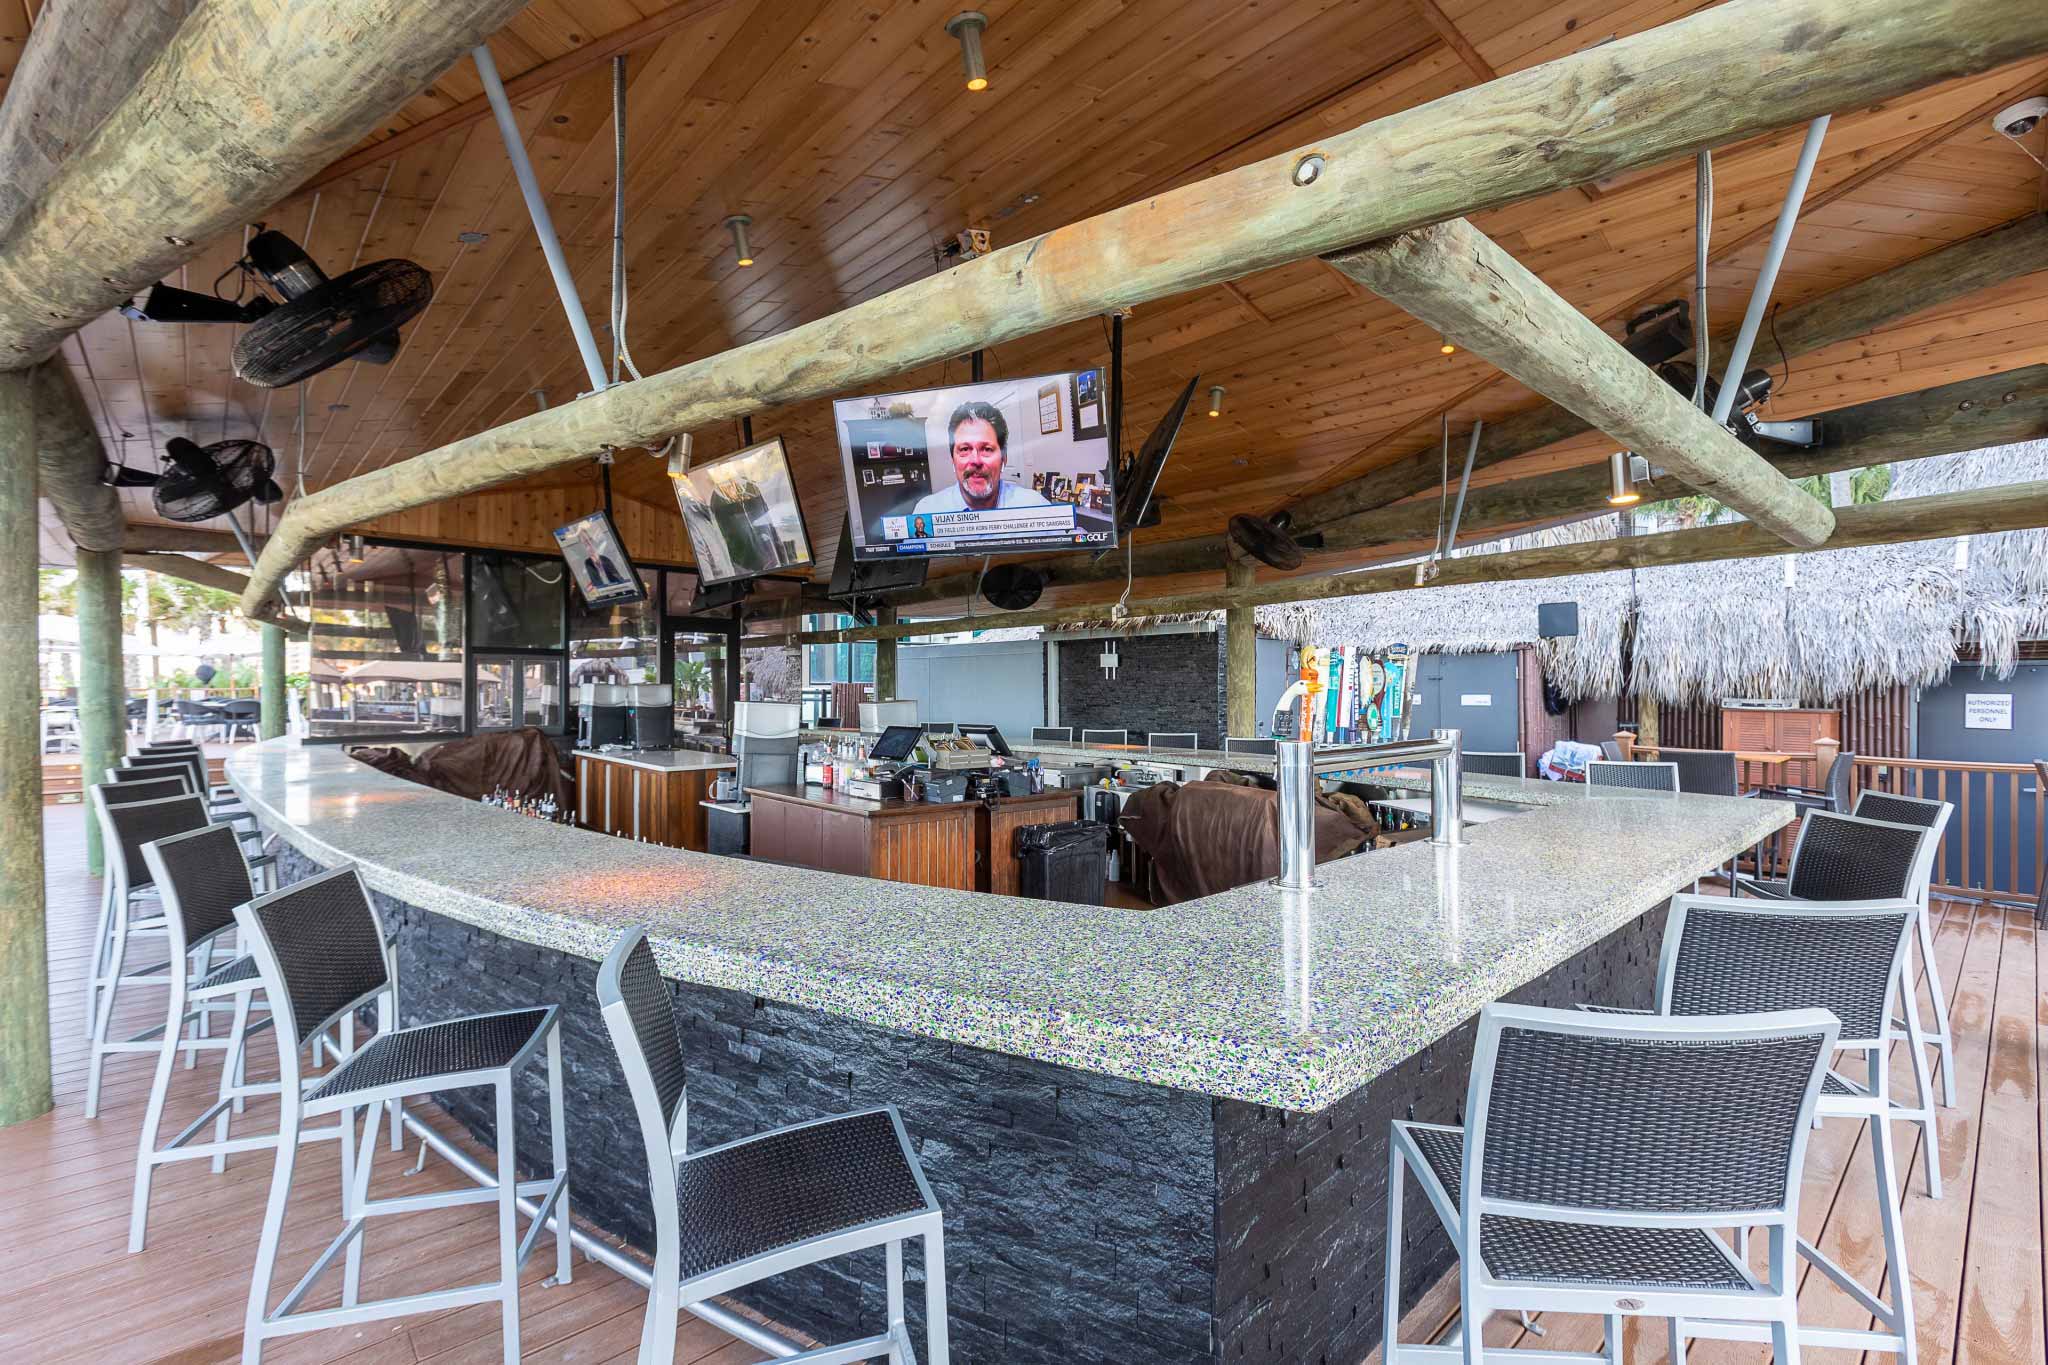 Outdoor bar with TVs and bar stools